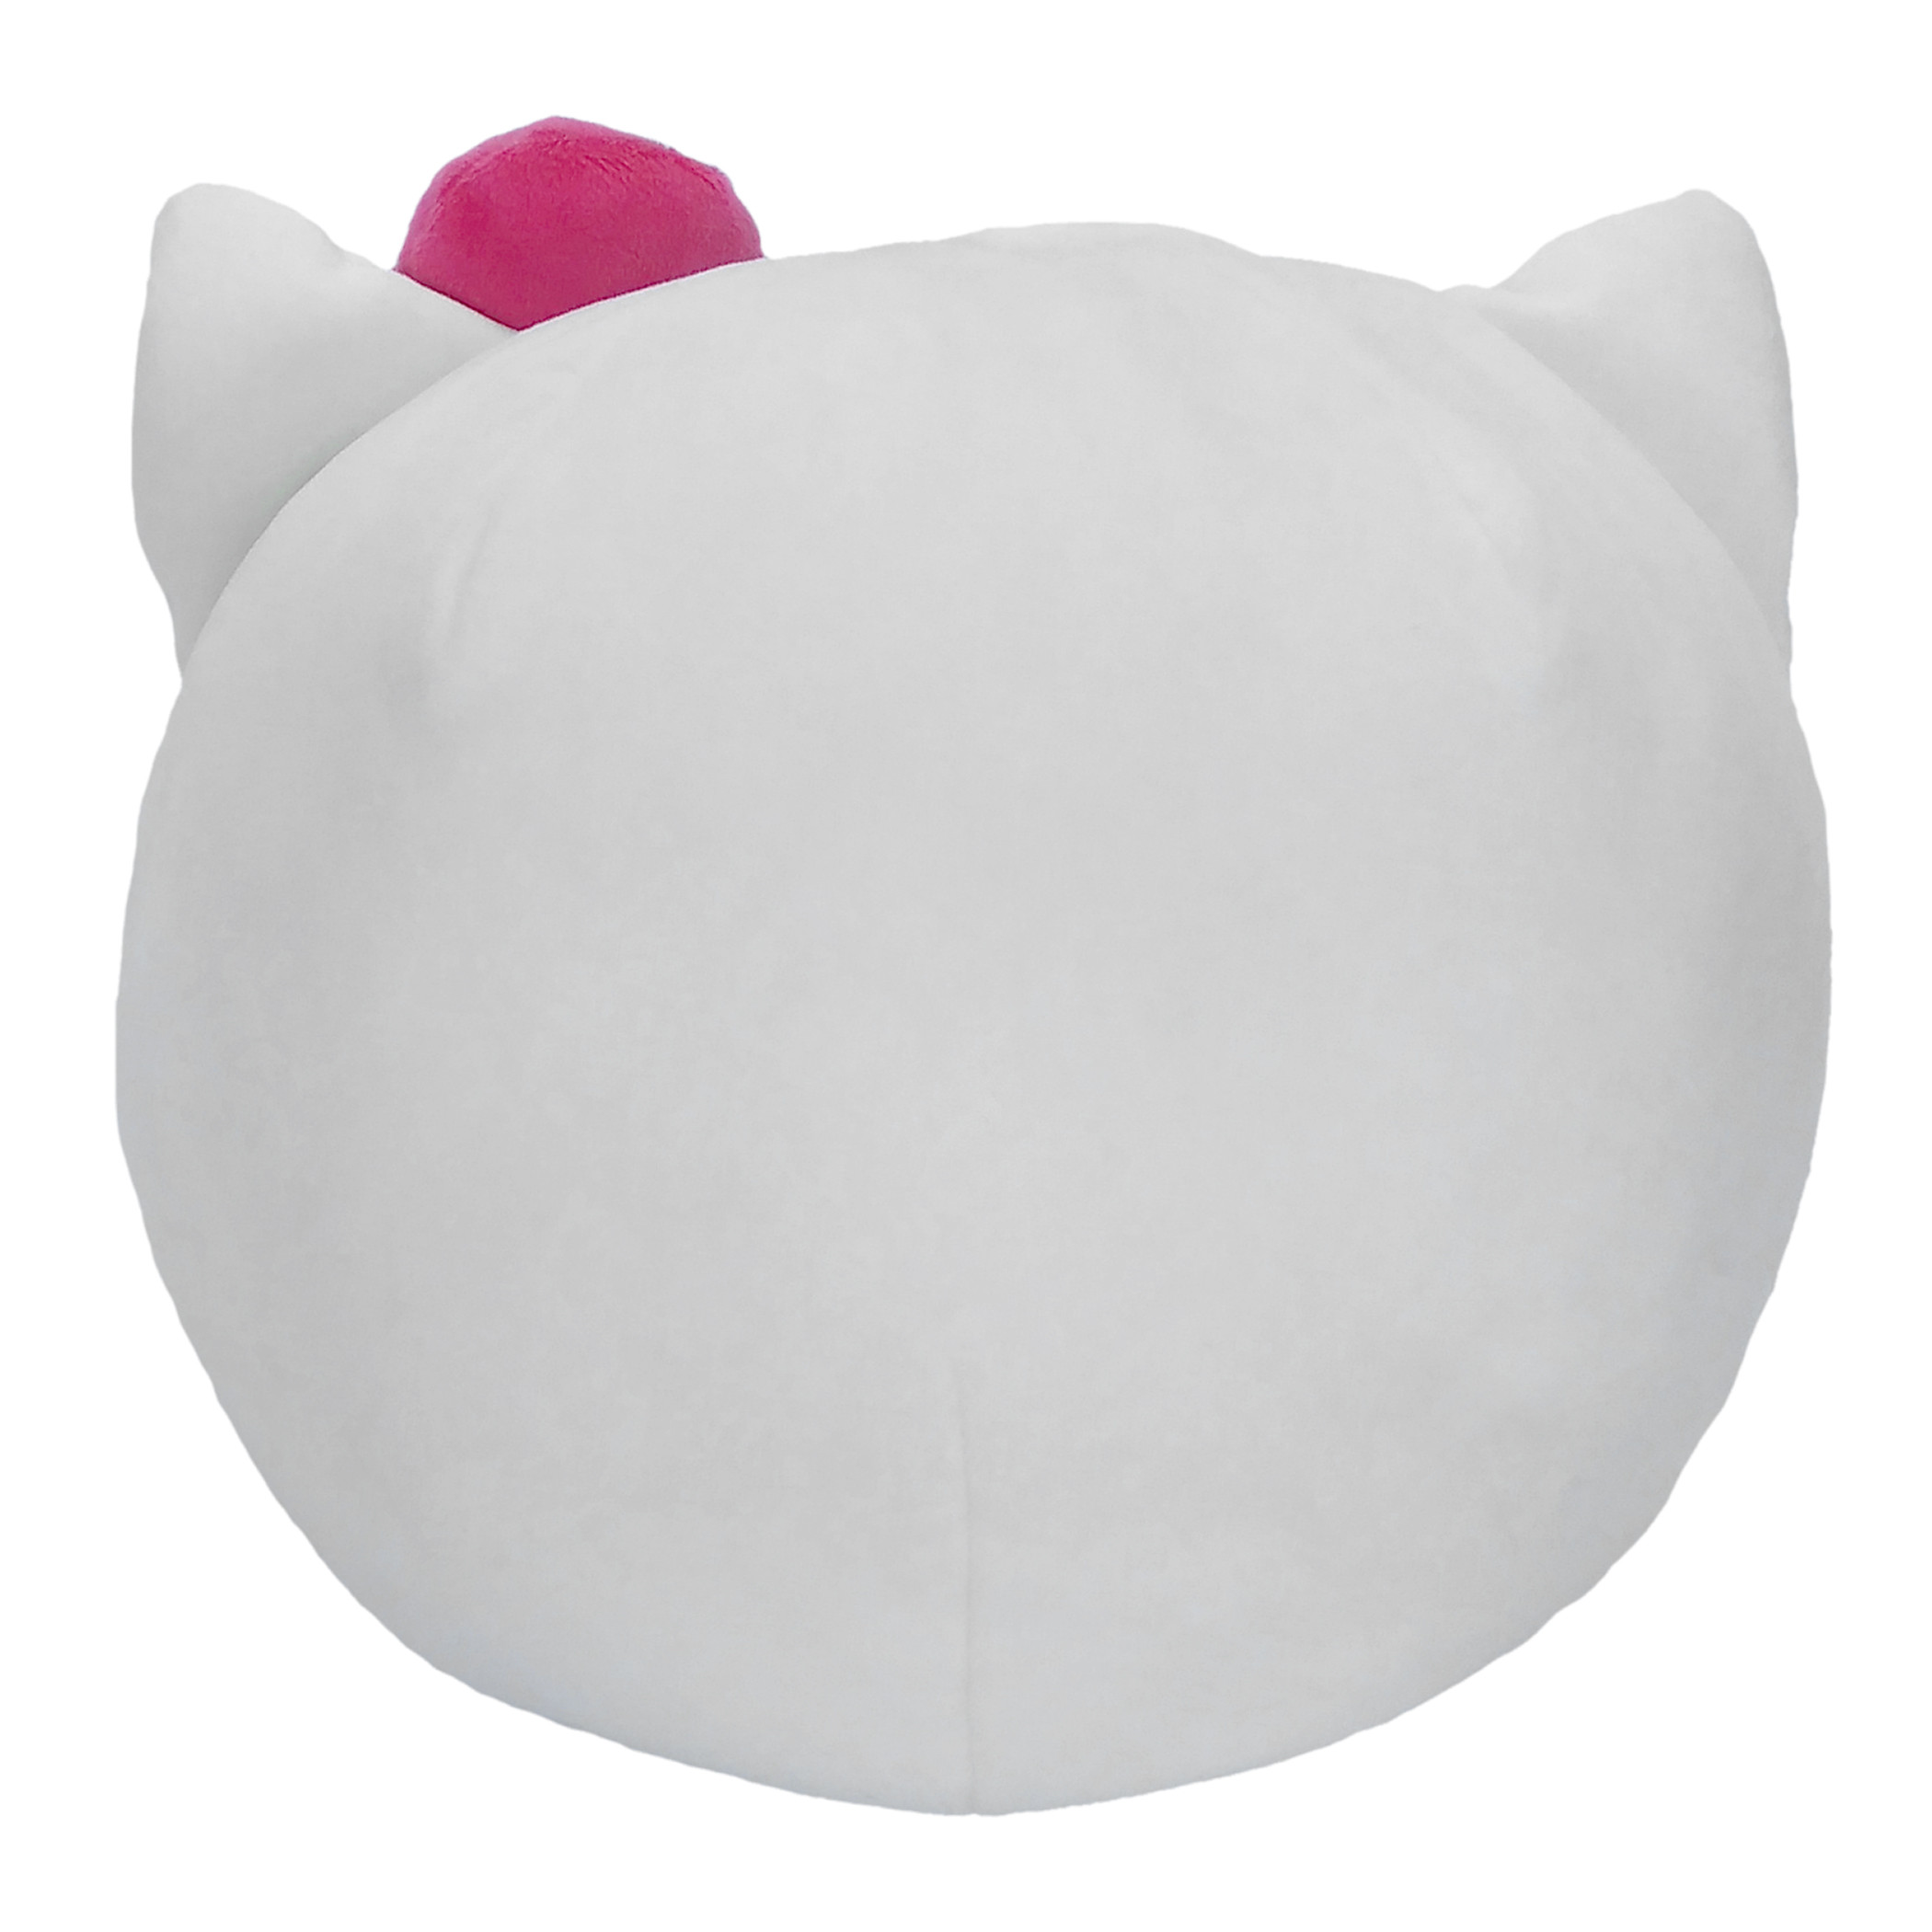 Hello Kitty Face 11" Round Cloud Pillow